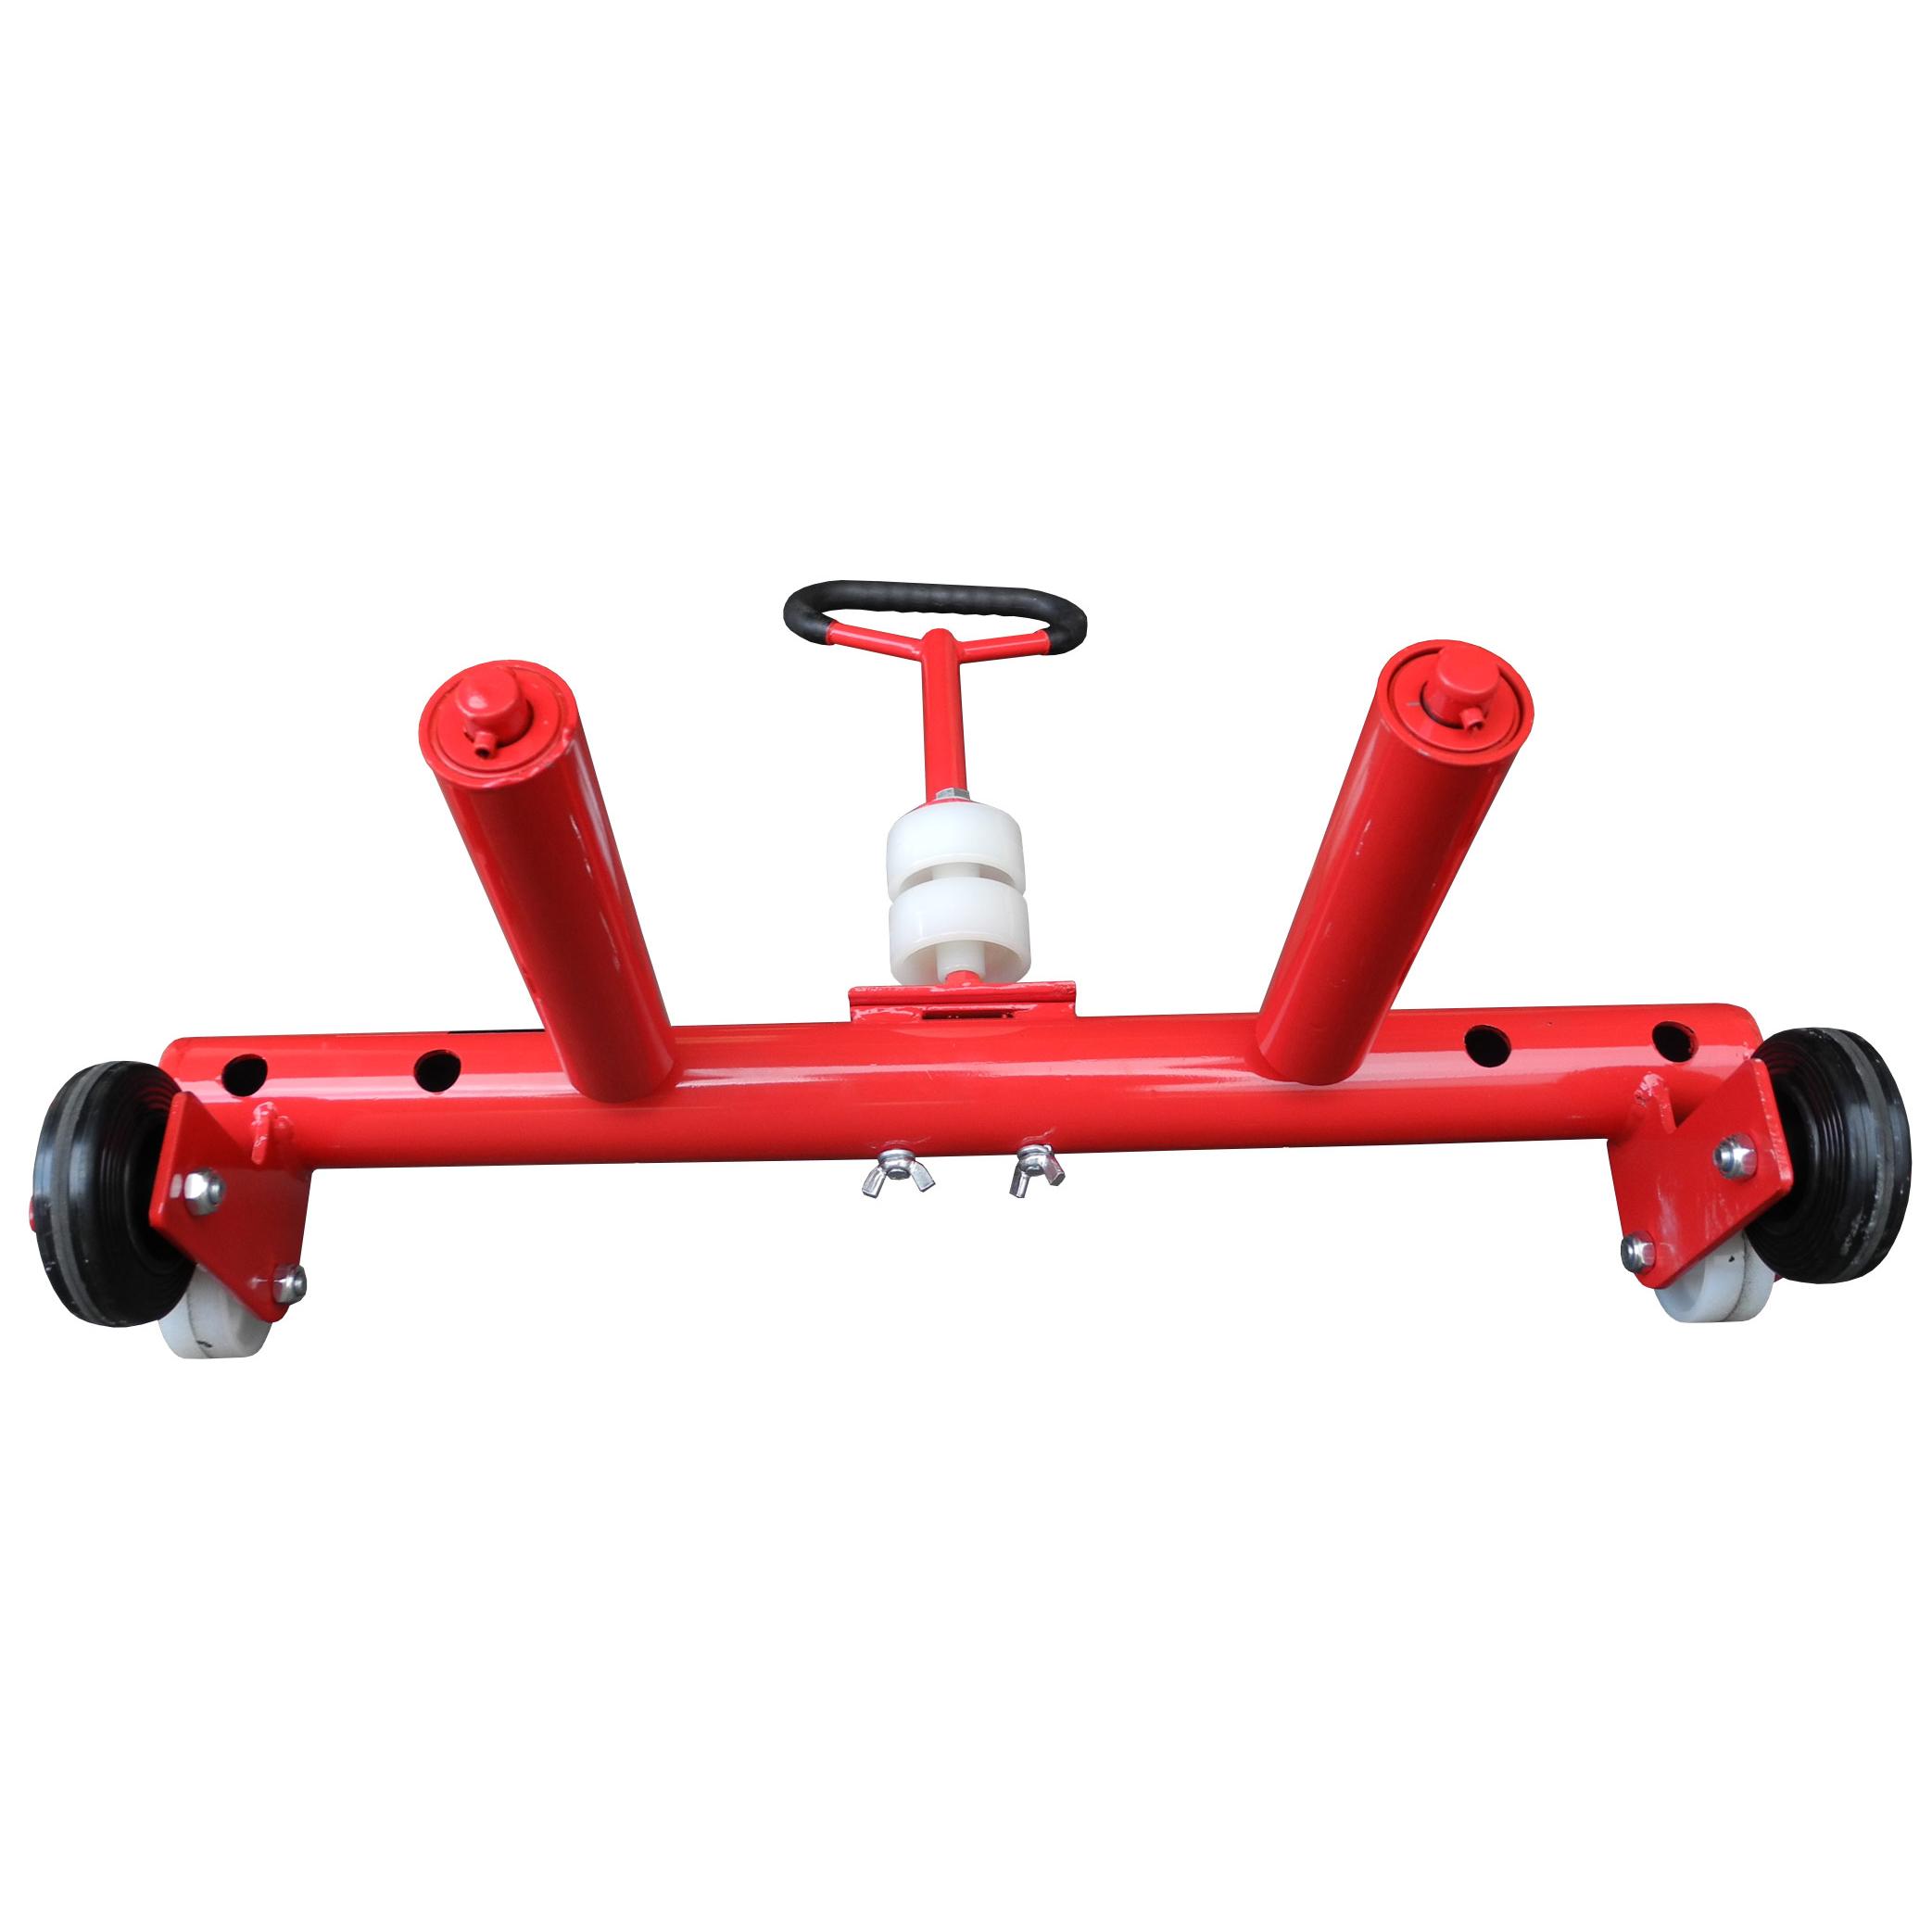 Redline Spring Action Automotive Tire Dolly Cart